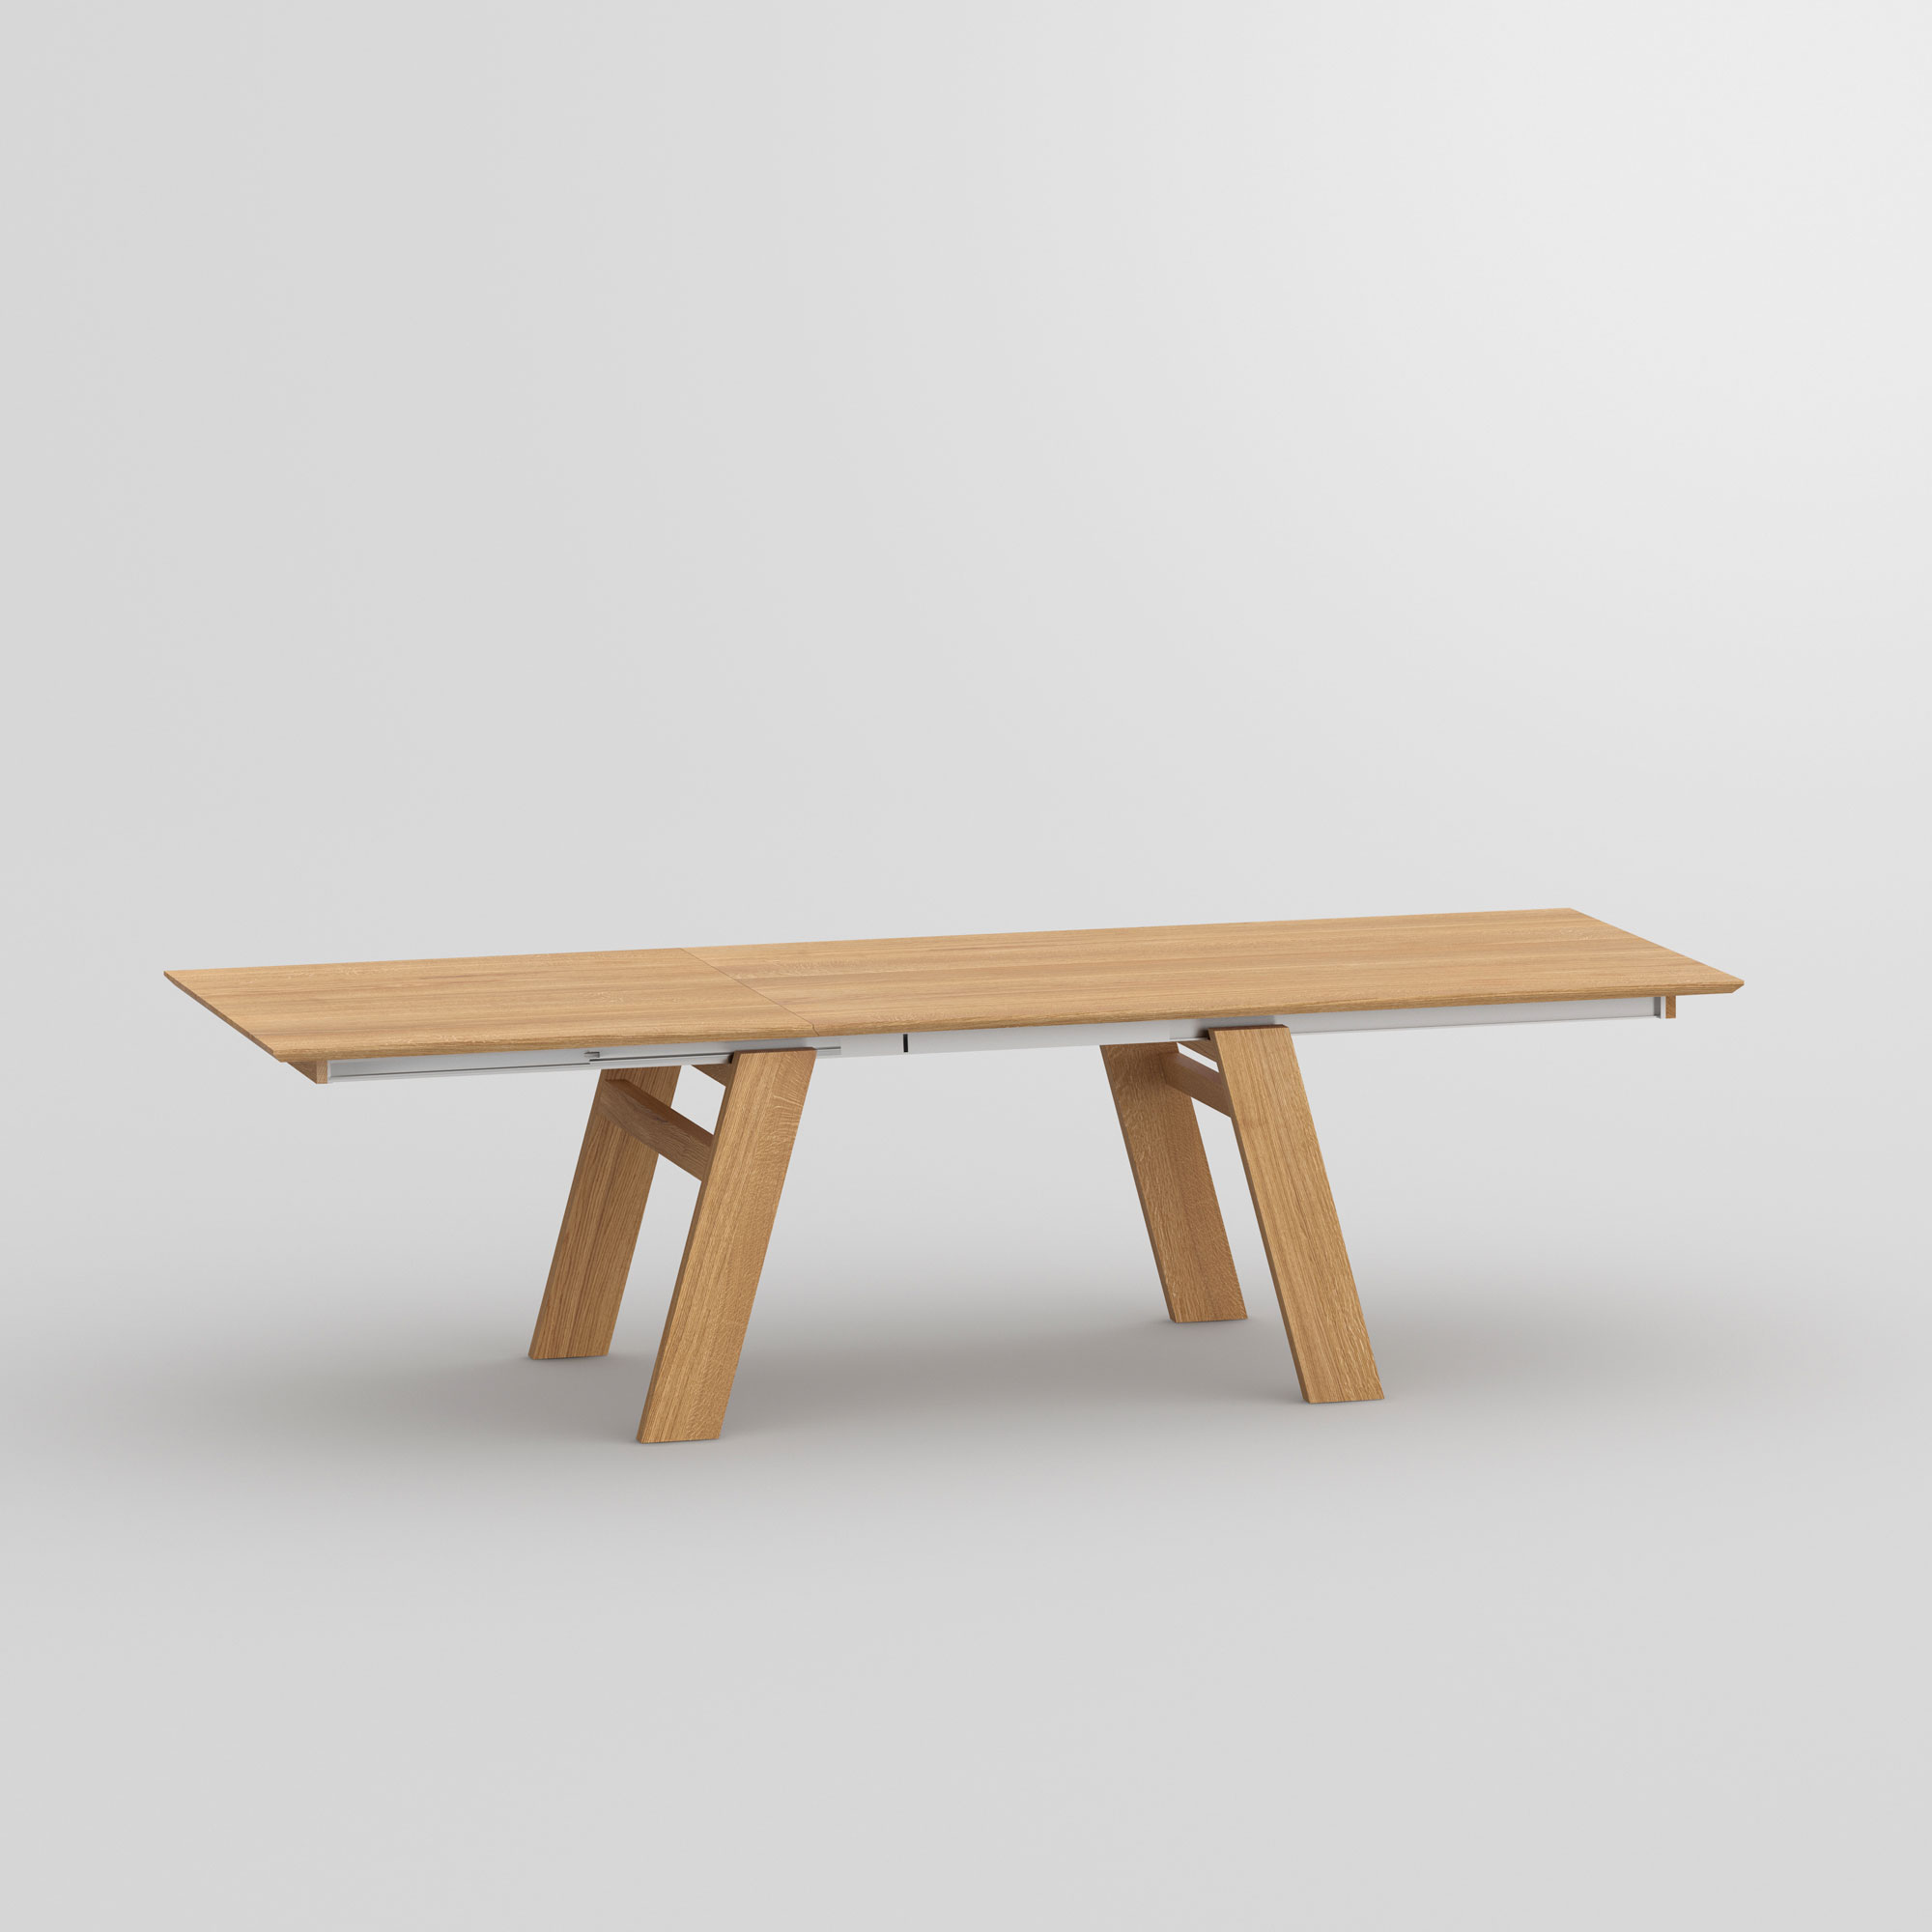 Solid Wood Extendable Table CULTUS BUTTERFLY cam1 custom made in solid wood by vitamin design